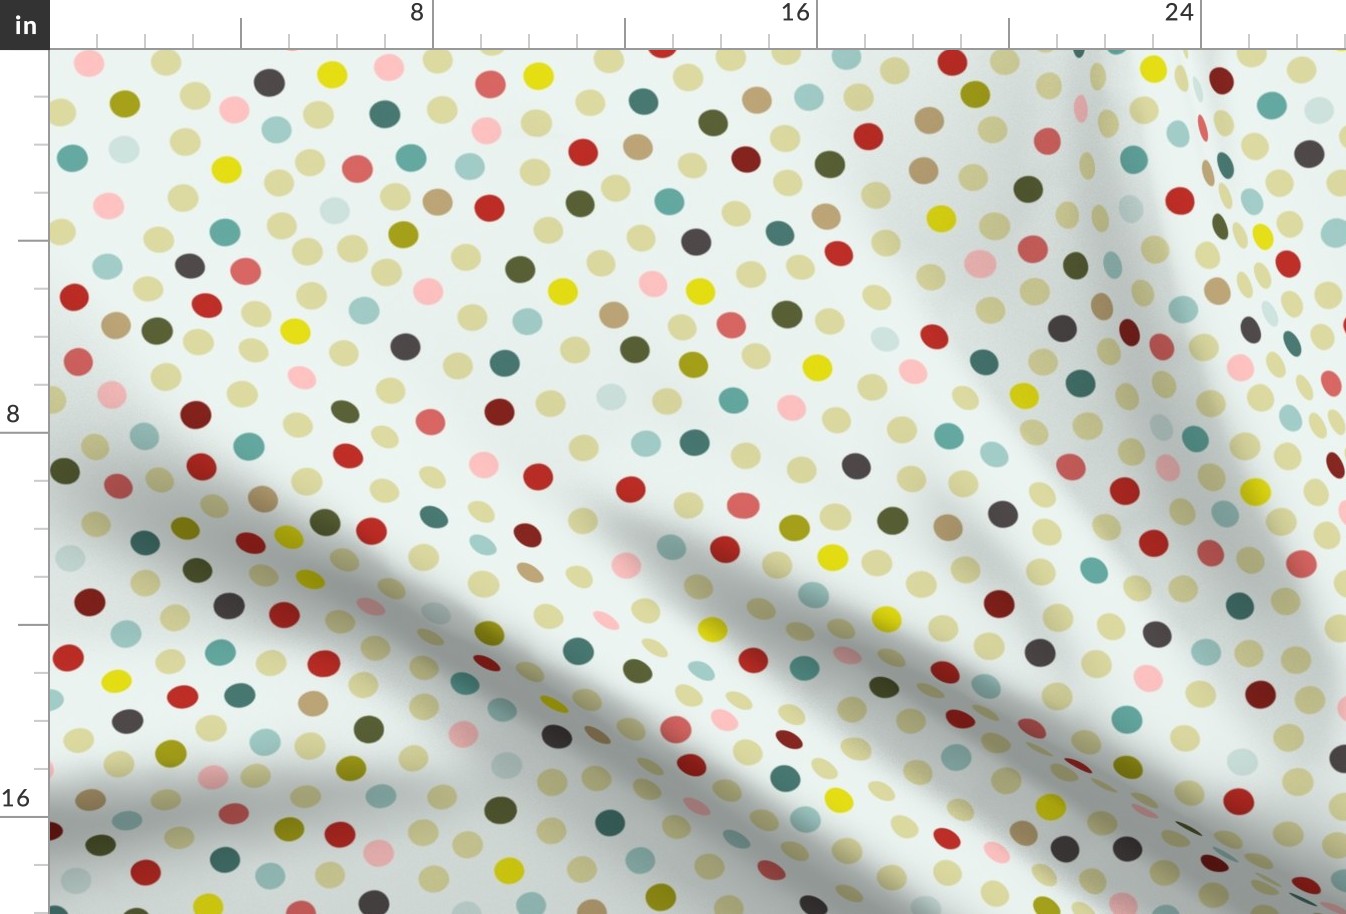 Festive Retro Polka Dots - Retro Christmas Collection - Poppy Red, Pink, Citrin, Olive, Teal on Light Sea Glass BG - SPD Collab